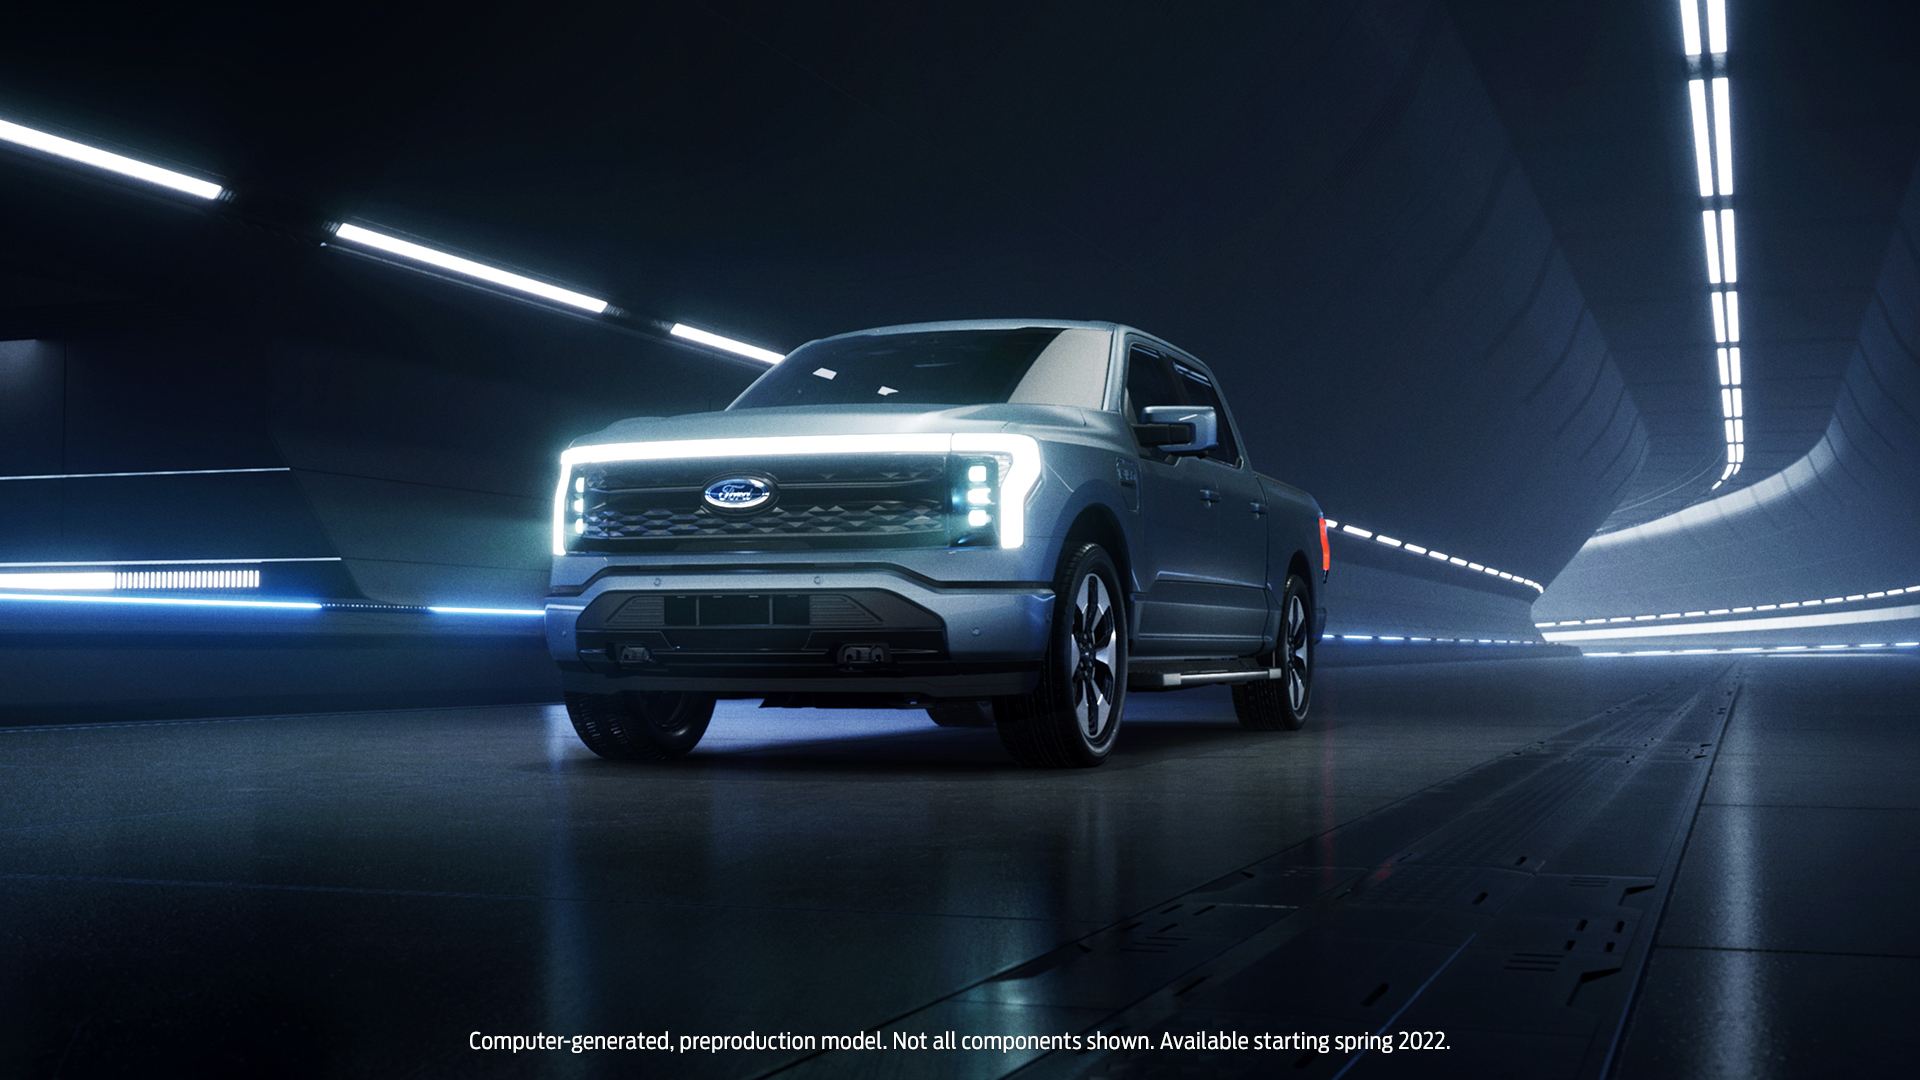 2022 Ford F-150 Lightning electric truck’s frunk is more than the space left over2022 Ford F-150 Lightning electric truck’s frunk is more than the space left over